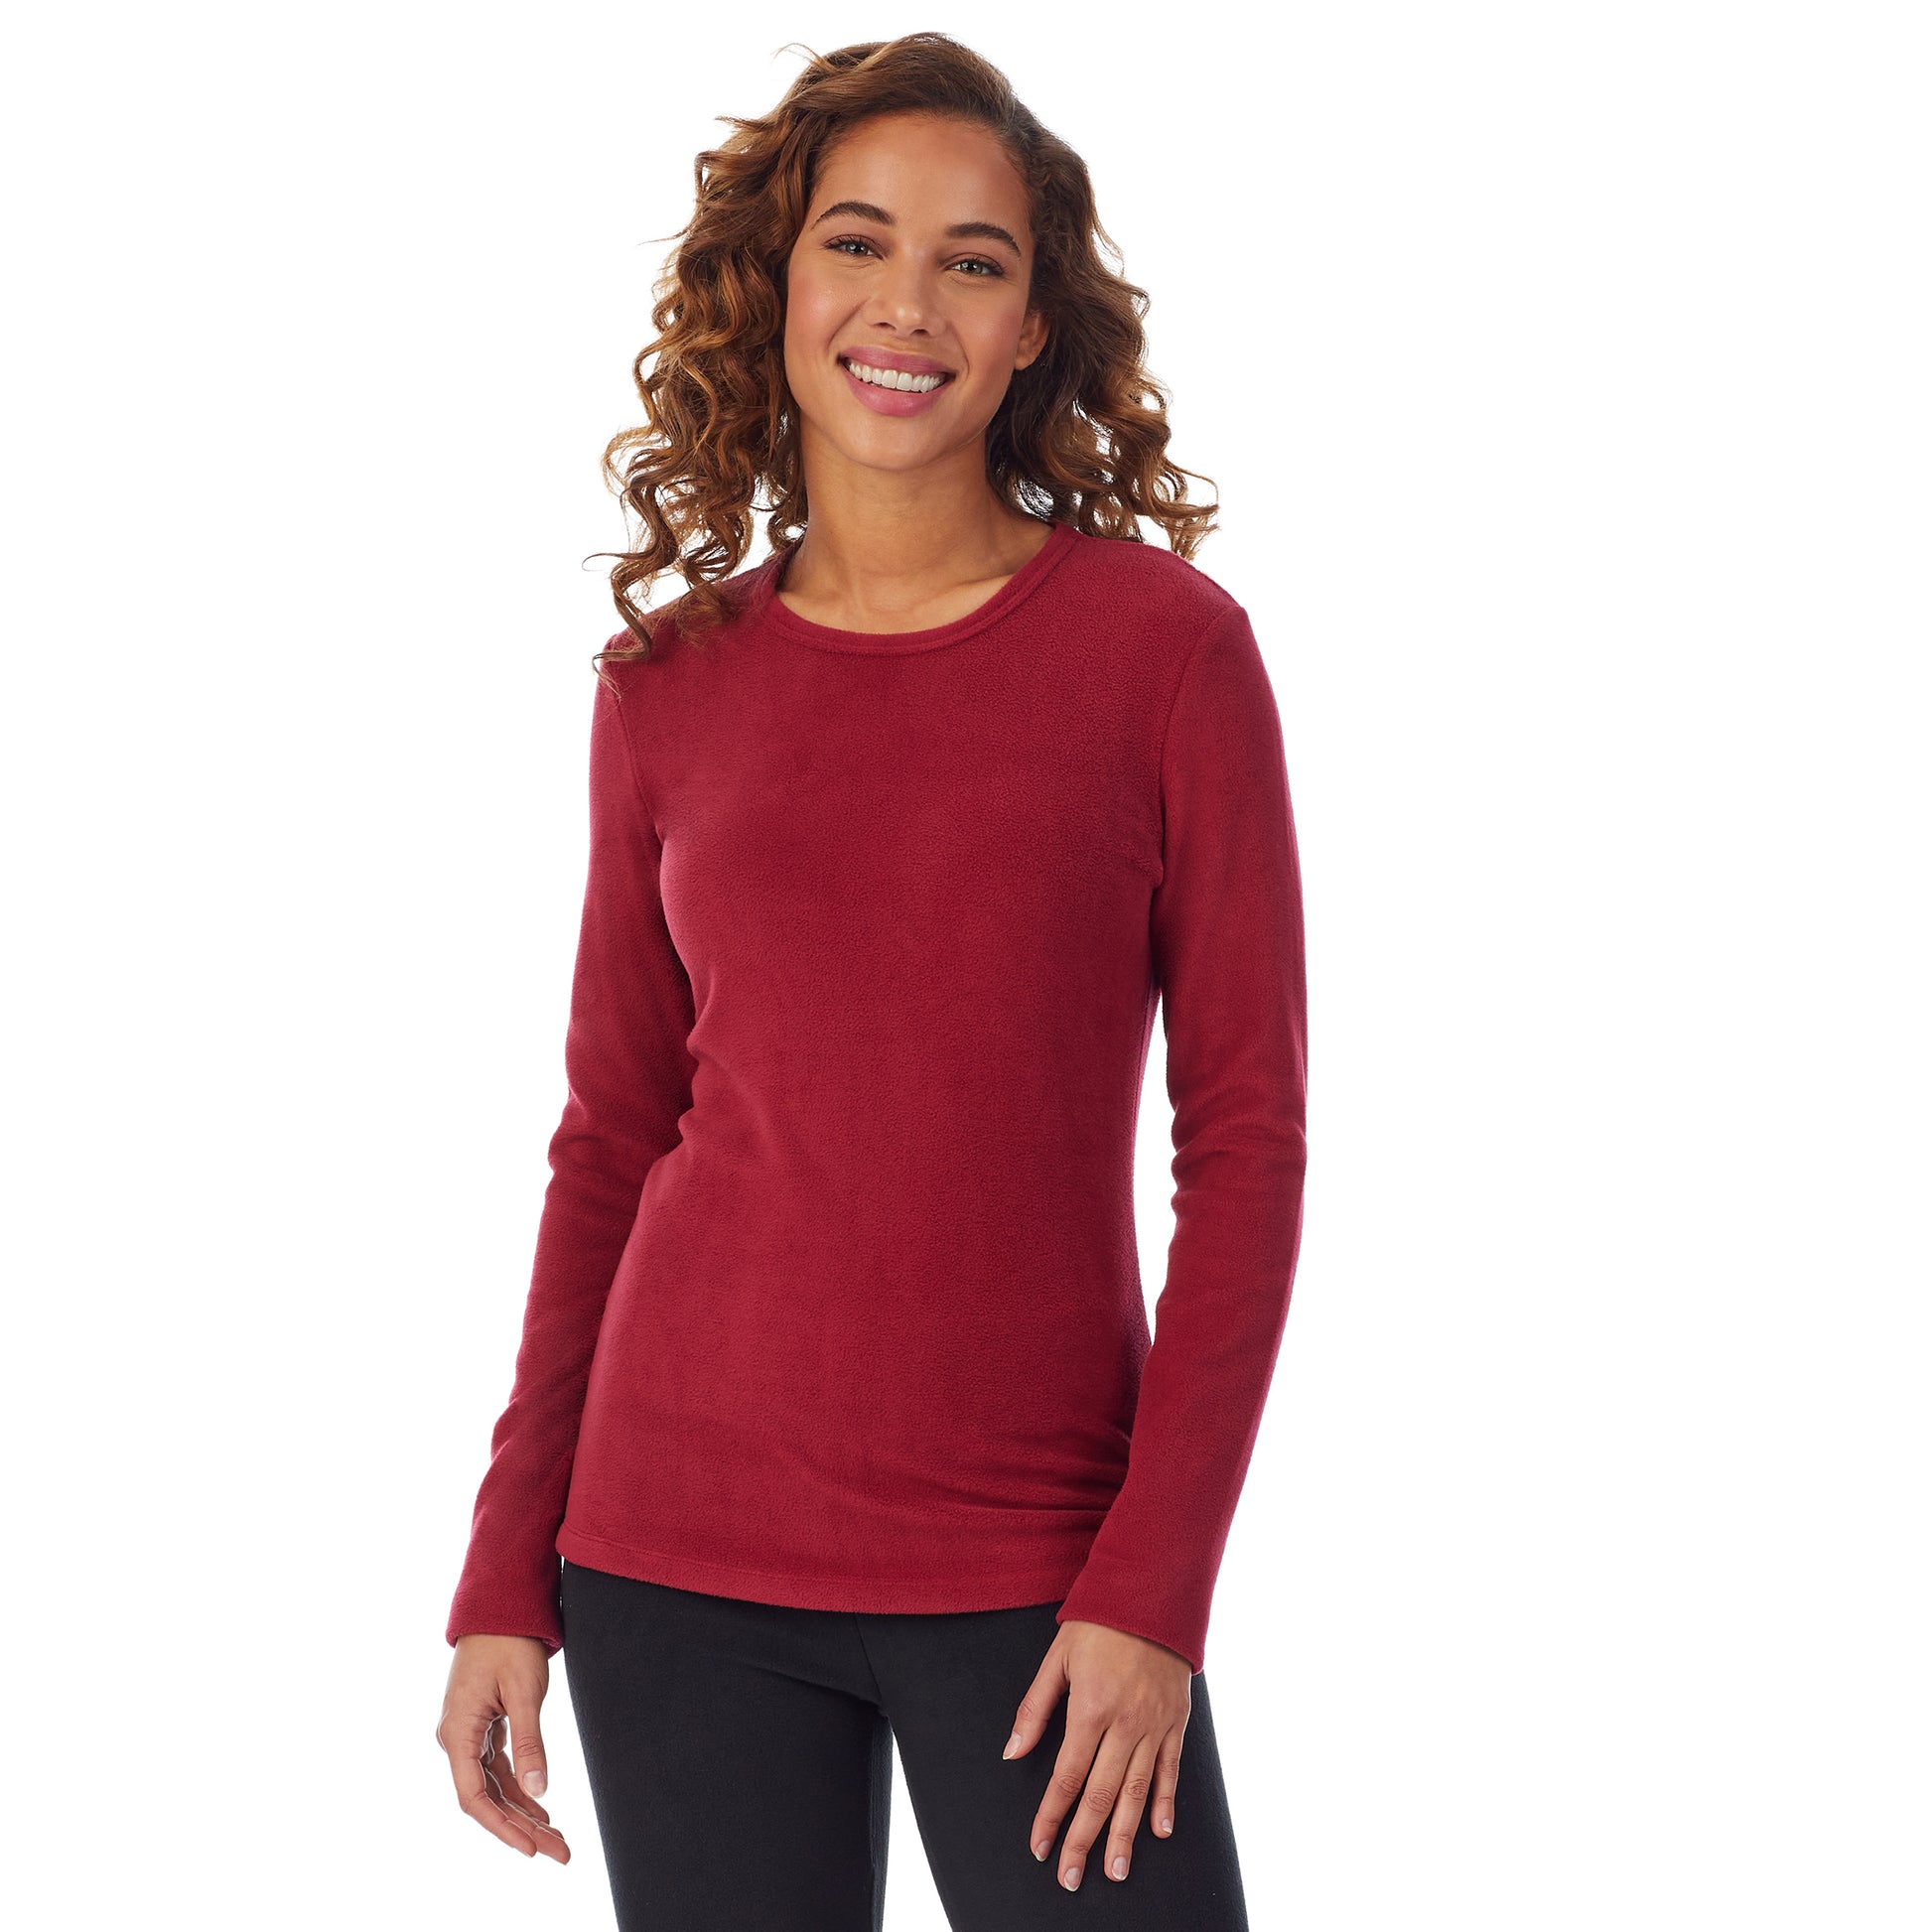 Rhubarb; Model is wearing size S. She is 5’9”, Bust 34”, Waist 23”, Hips 35”.@Upper body of a lady wearing red long sleeve crew